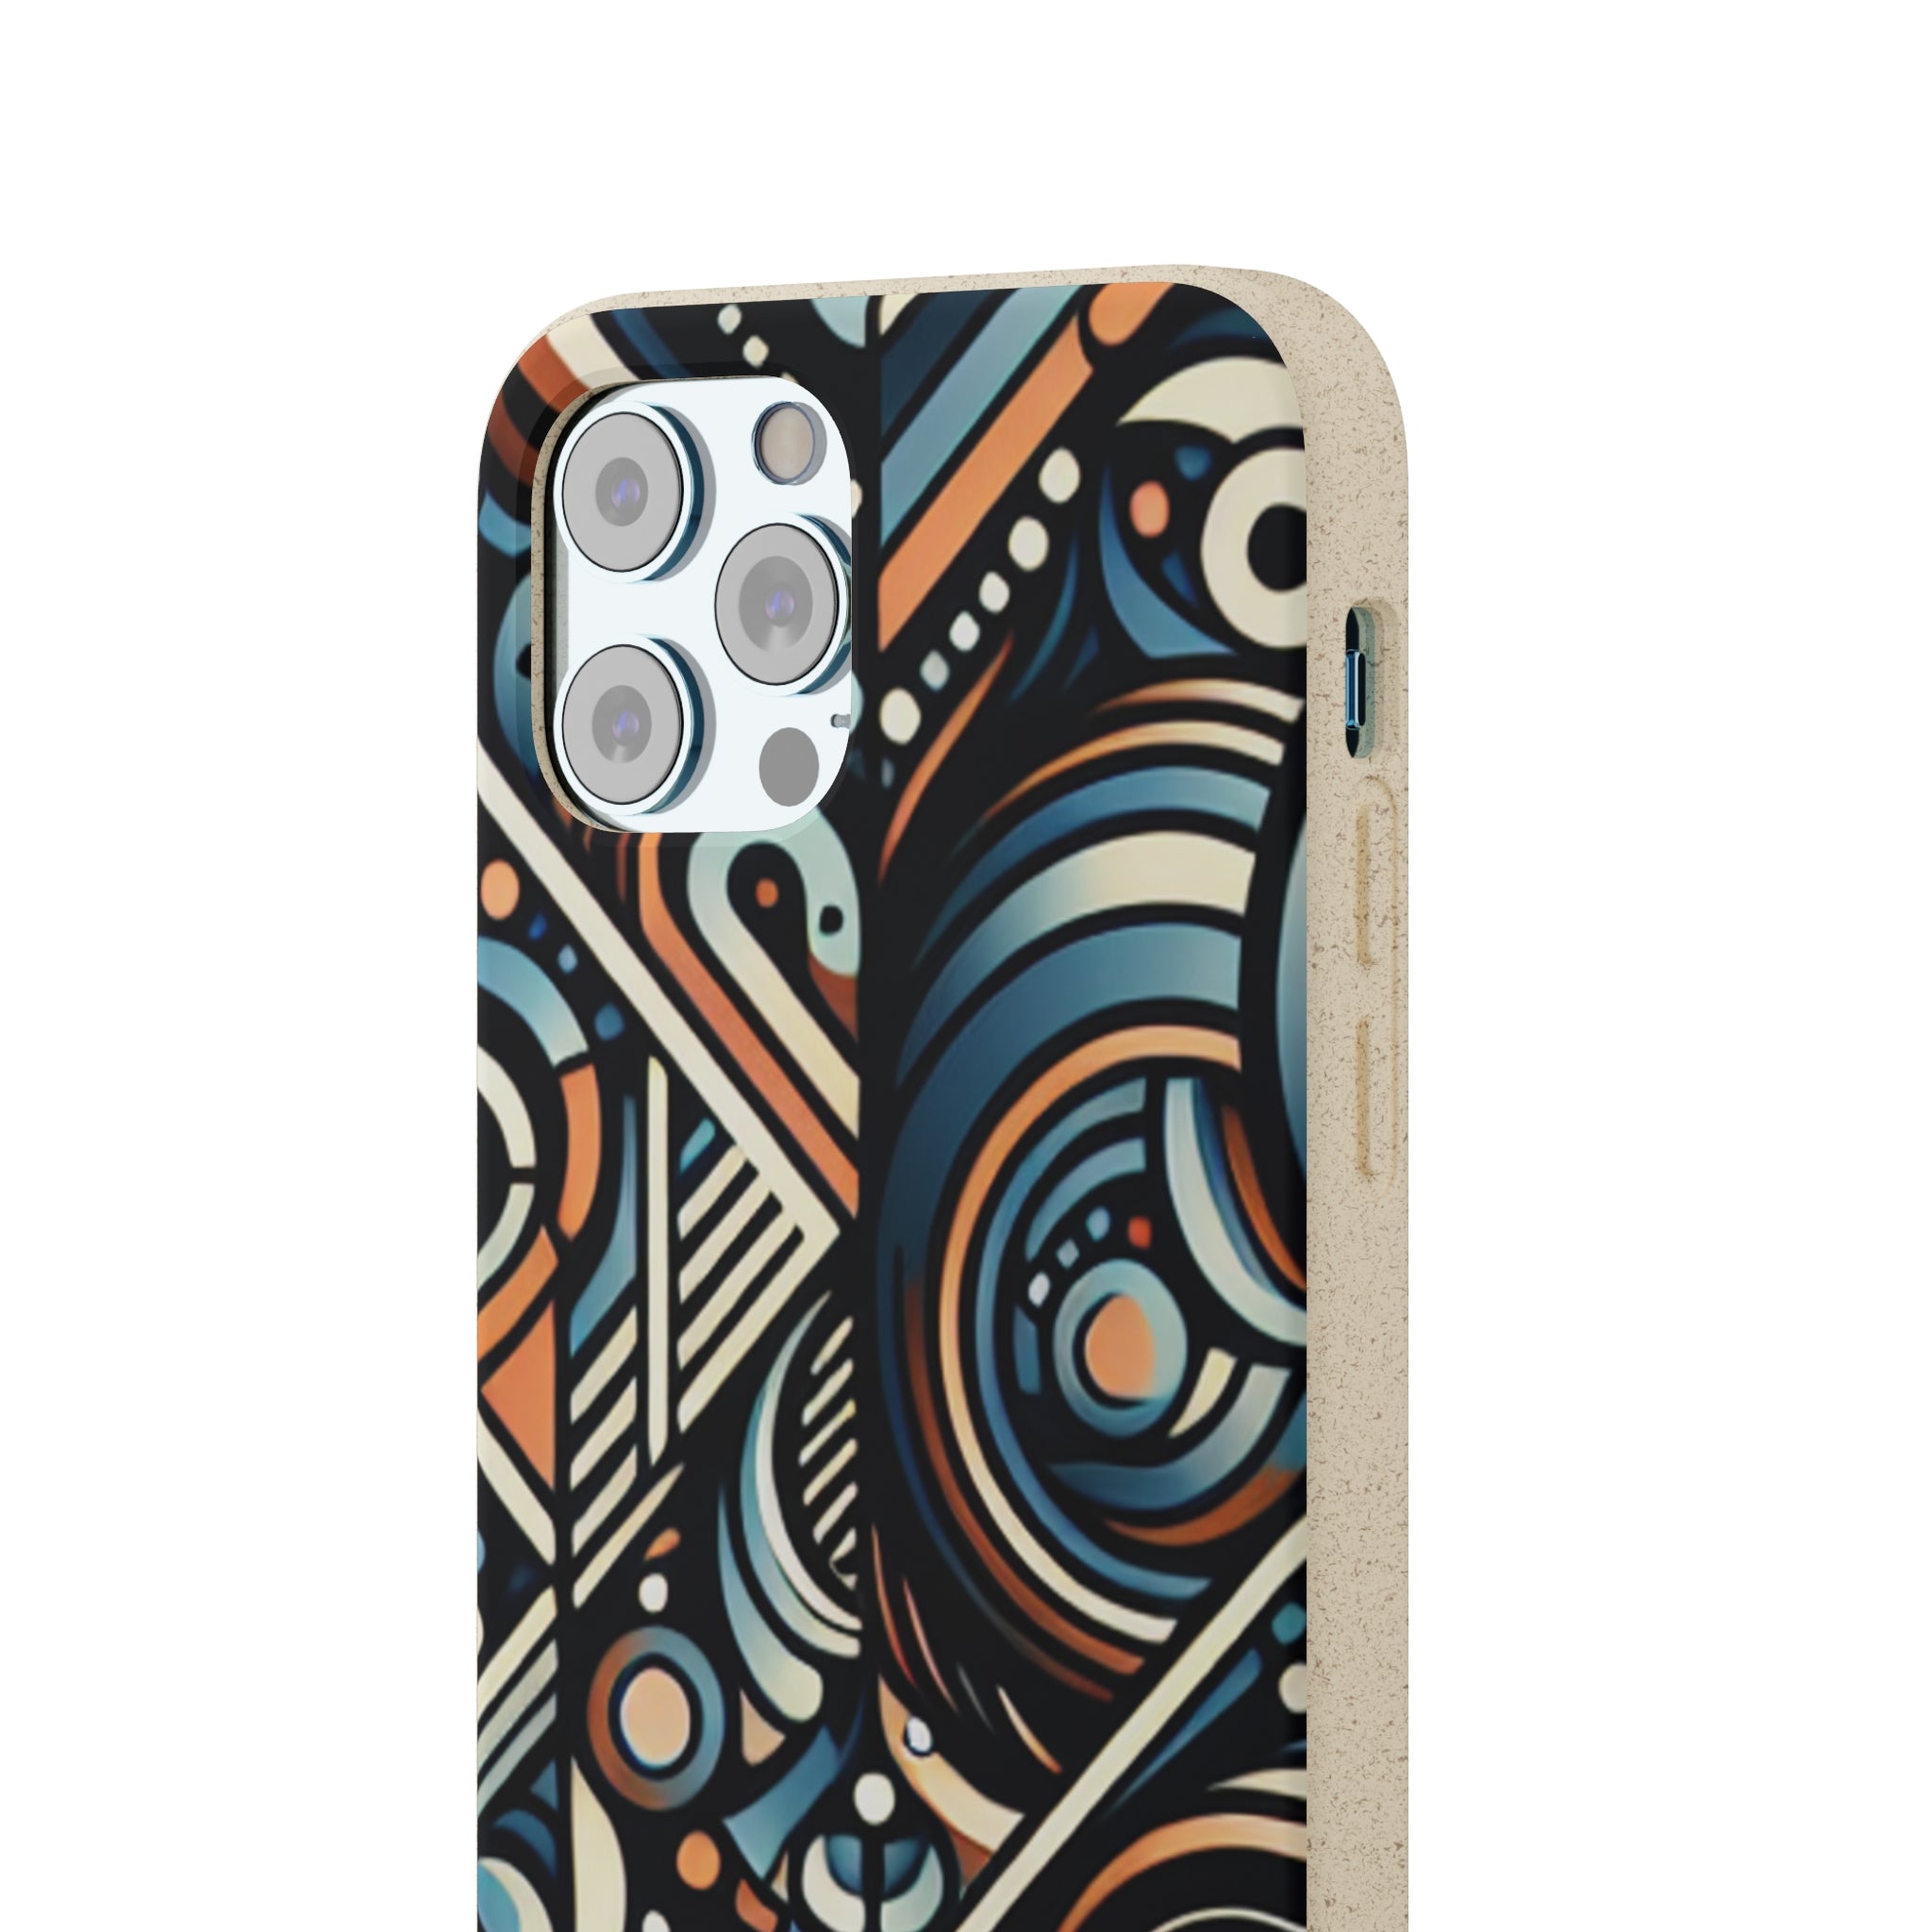 Abigail Moore - Biodegradable iPhone Cases